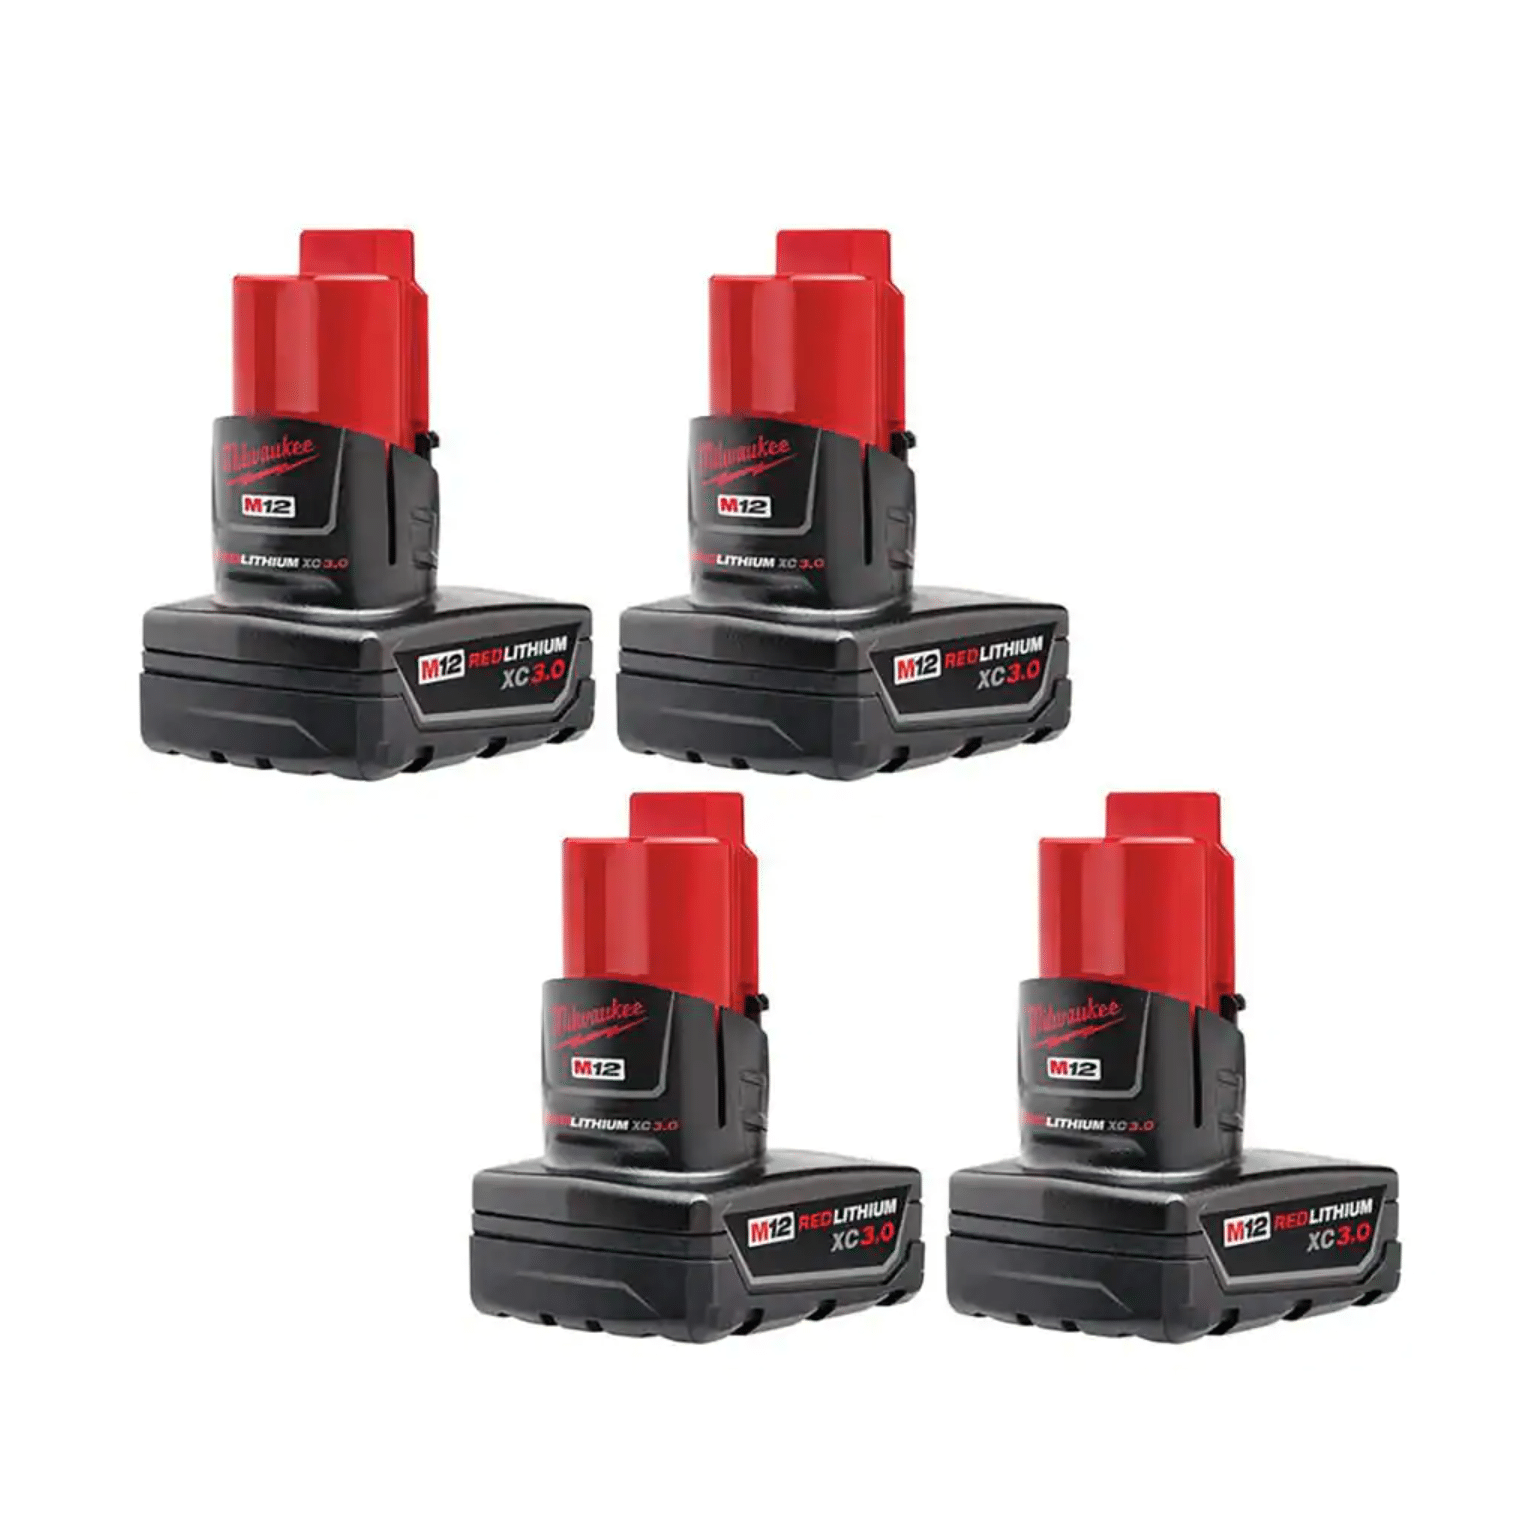 Milwaukee M12 12-Volt Lithium-Ion XC Extended Capacity 3.0 Ah Battery Pack, 4-Pack (48-11-2412-48-11-2412)